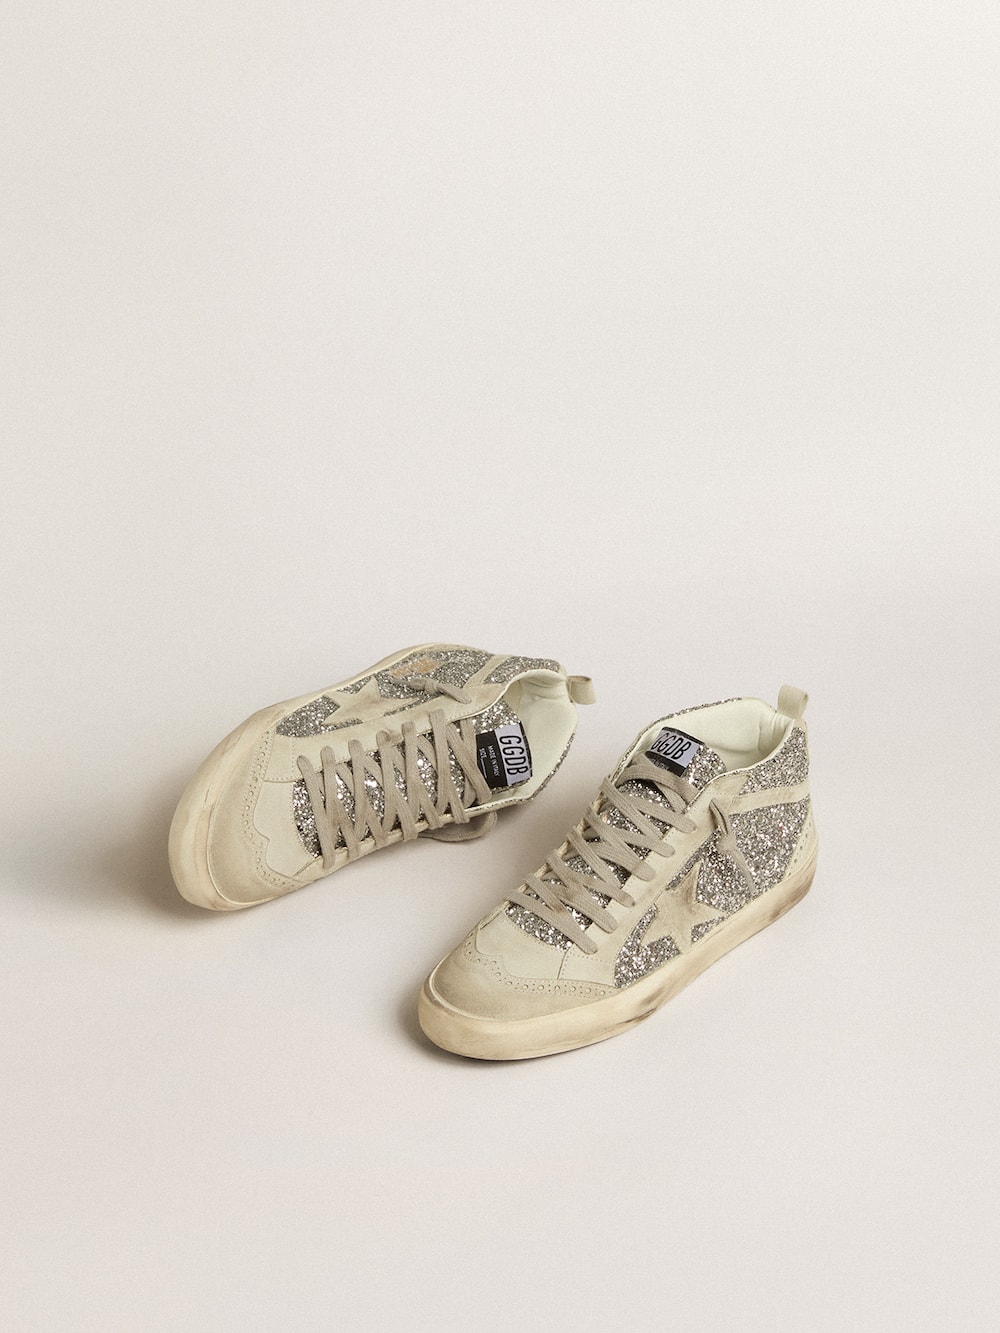 Golden Goose - Mid Star in silver glitter with ice-gray suede star and flash in 